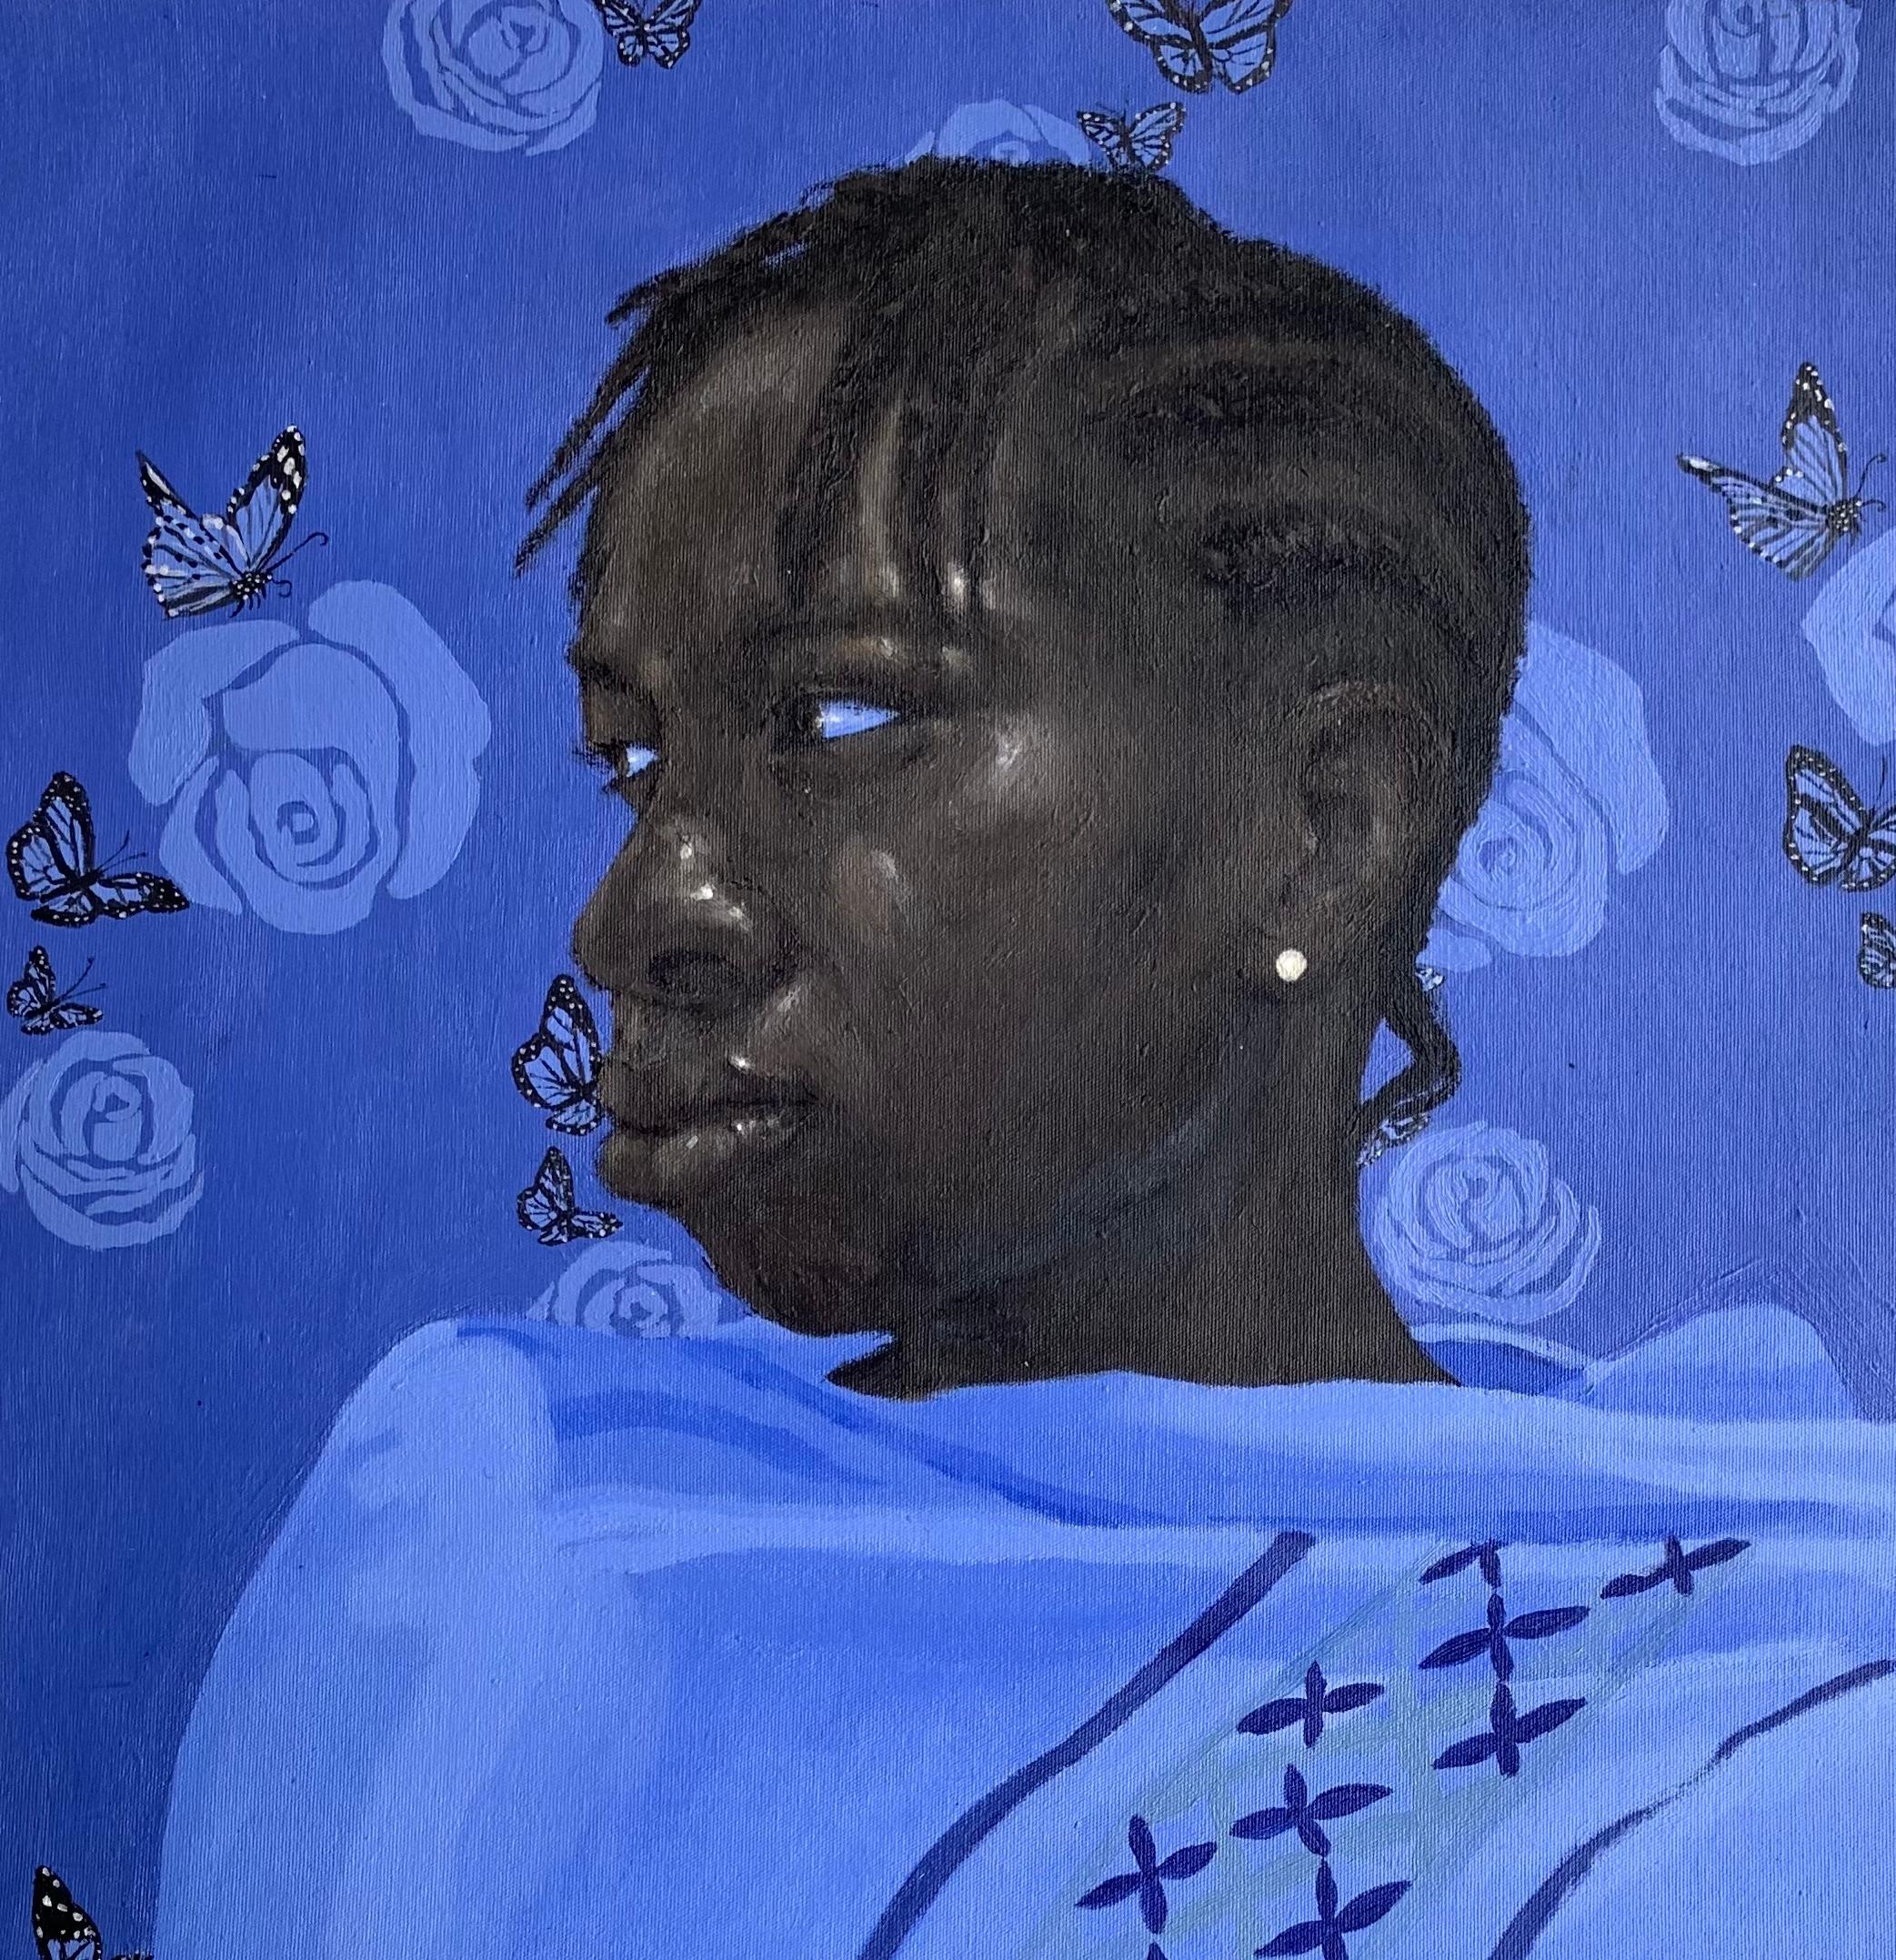 Blue Towel 2 - Painting by Olamilekan Bello